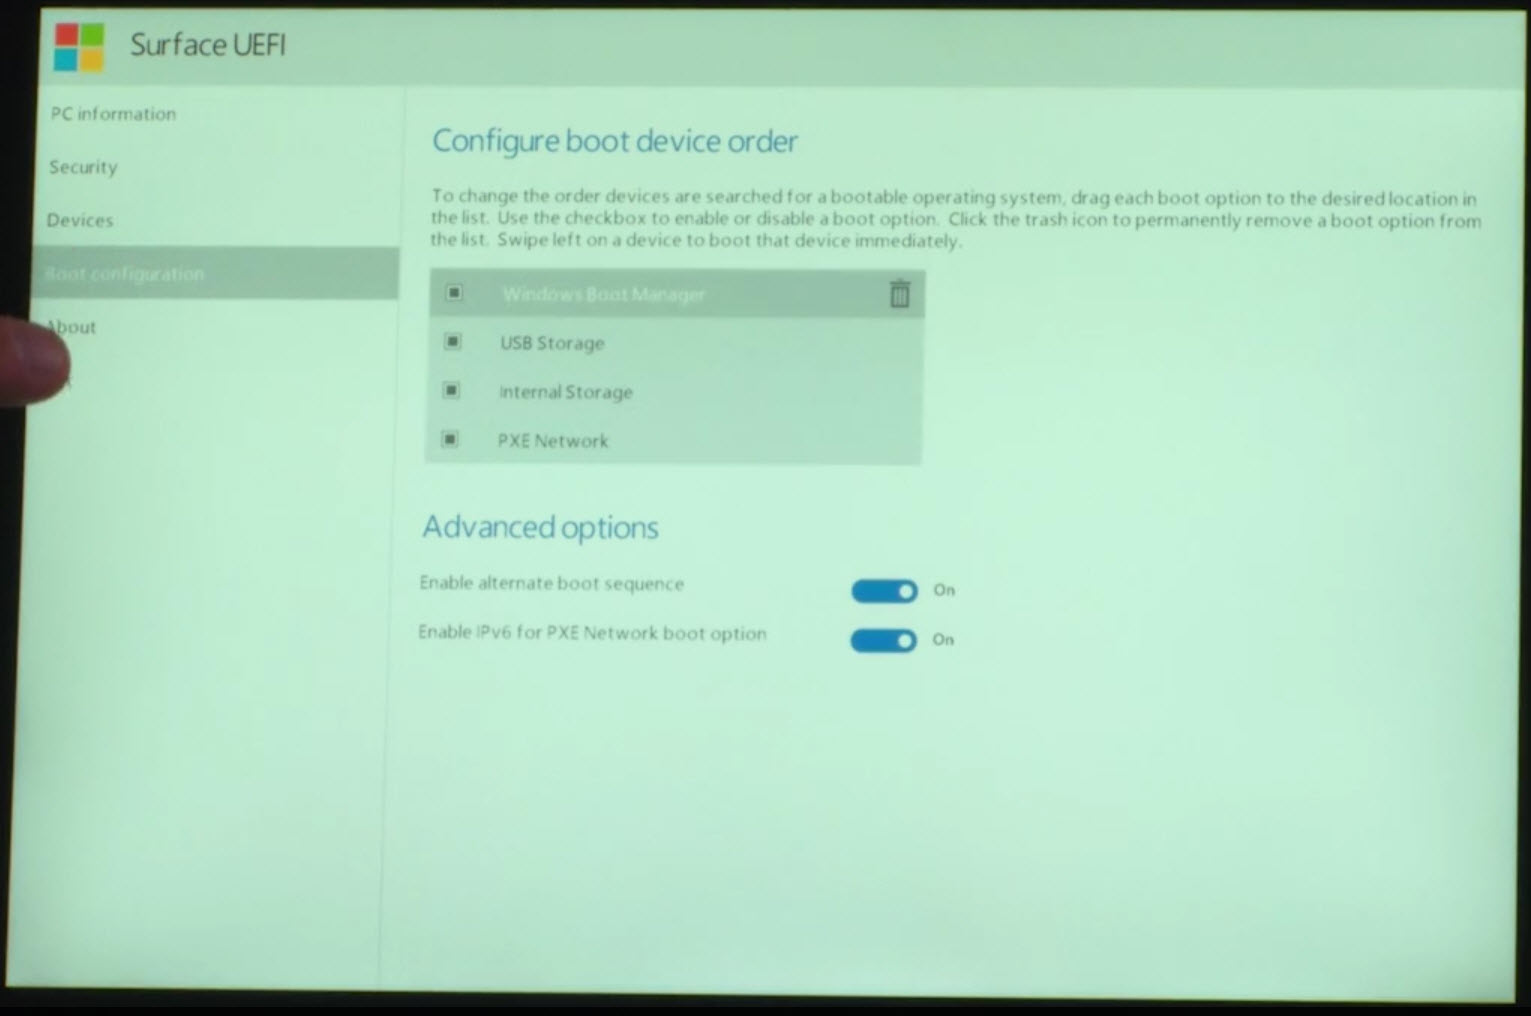 Surface UEFI Boot Configuration official Microsoft